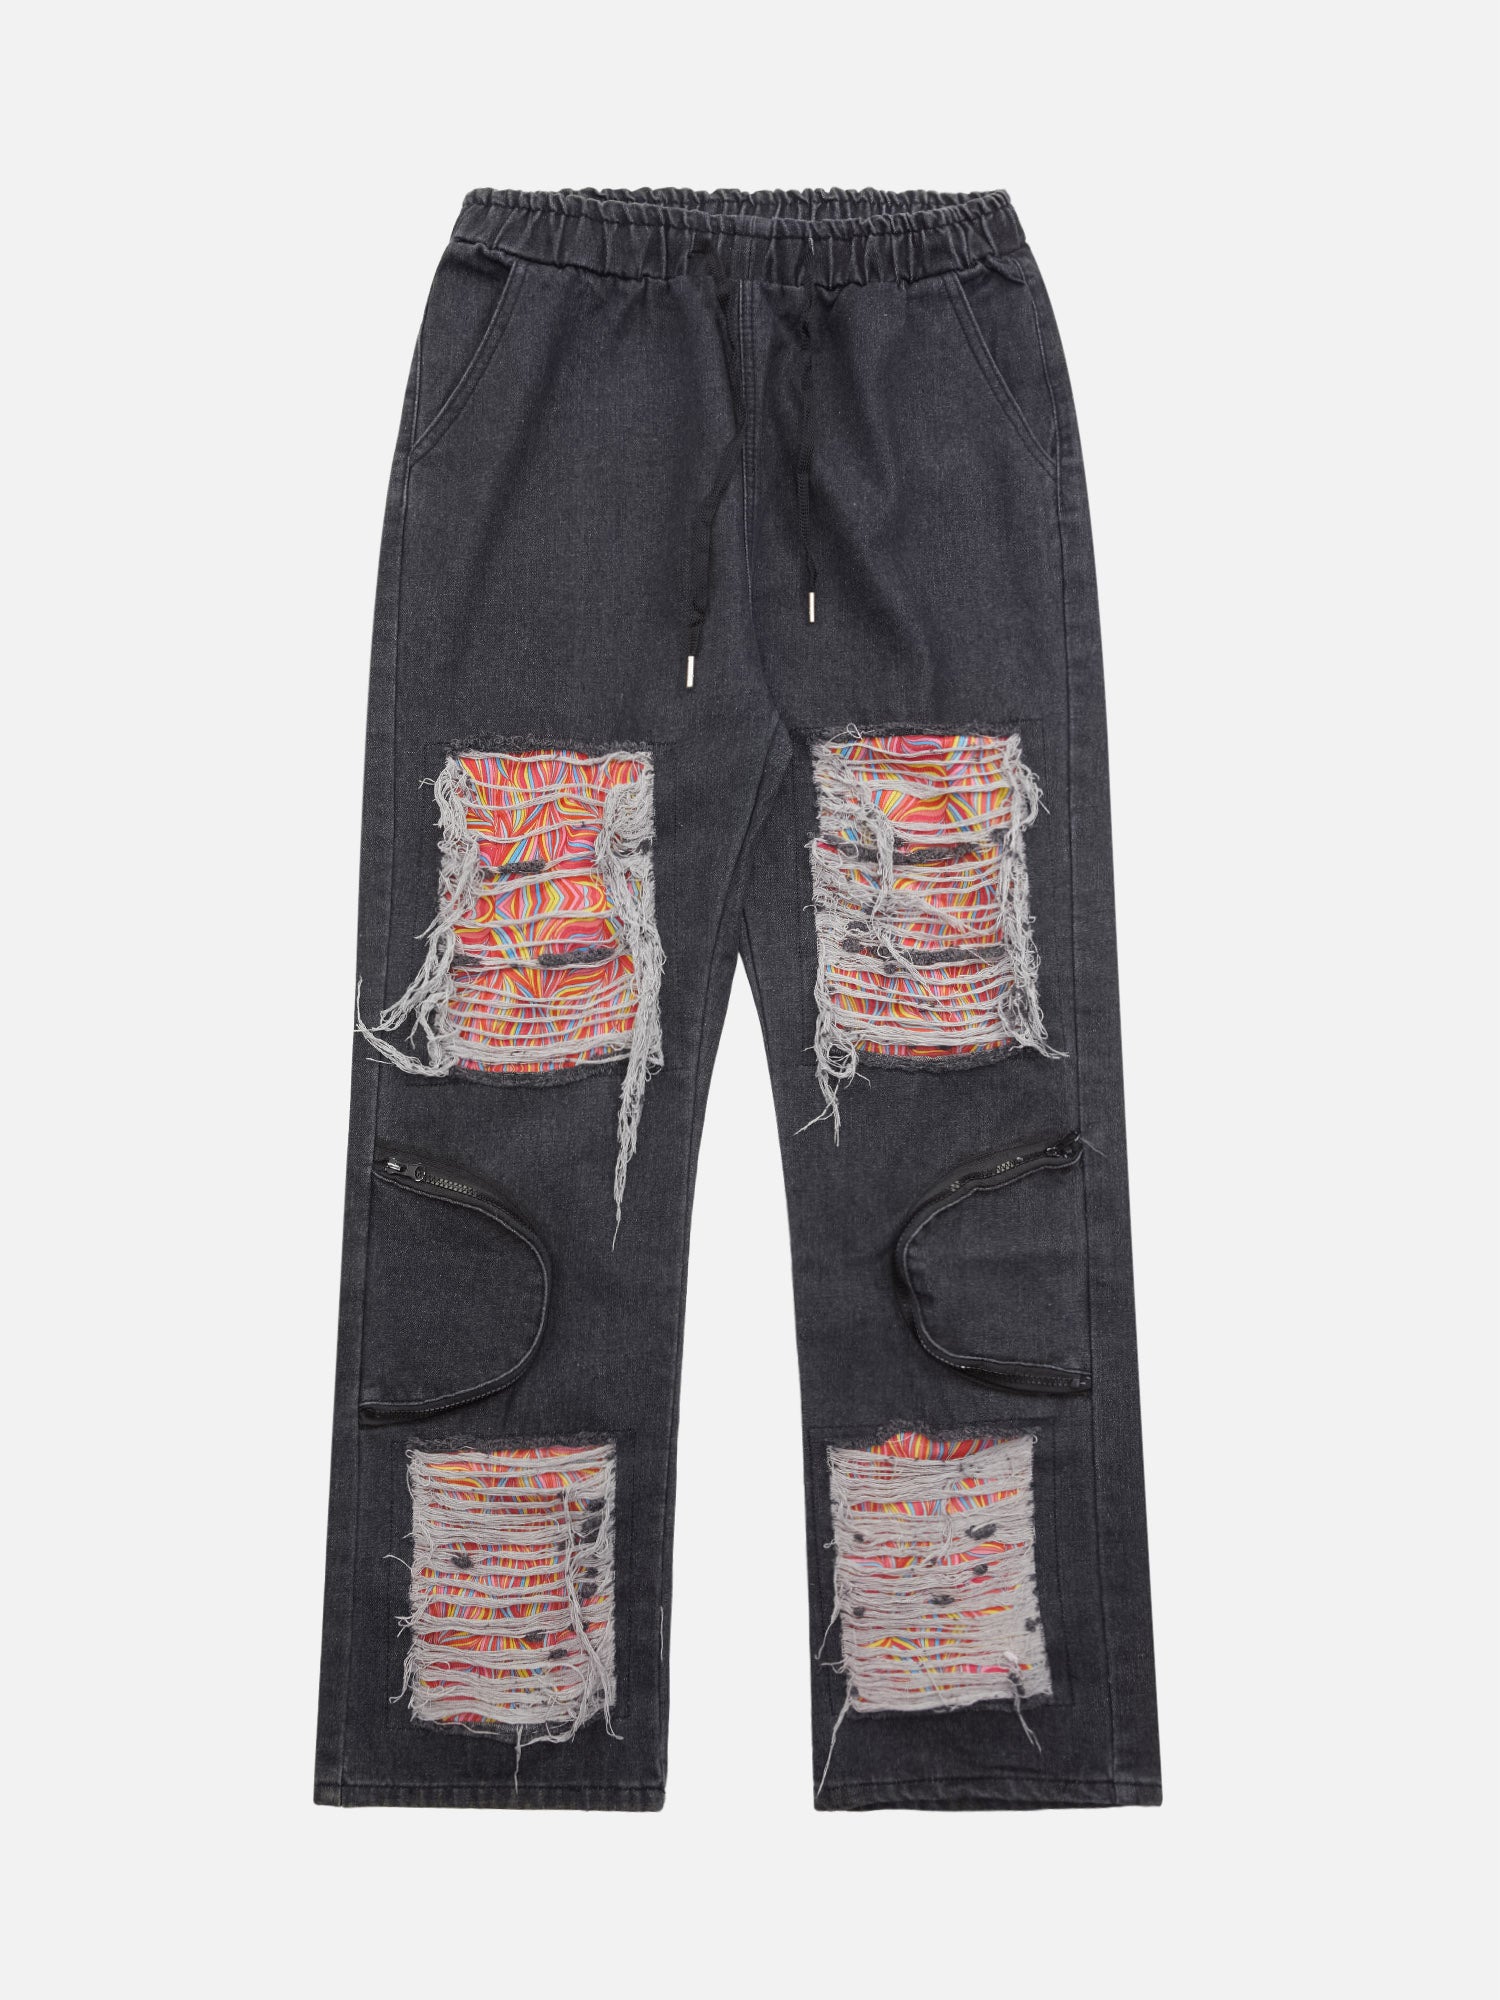 Thesupermade High Street Hip Hop Ripped Patch Jeans